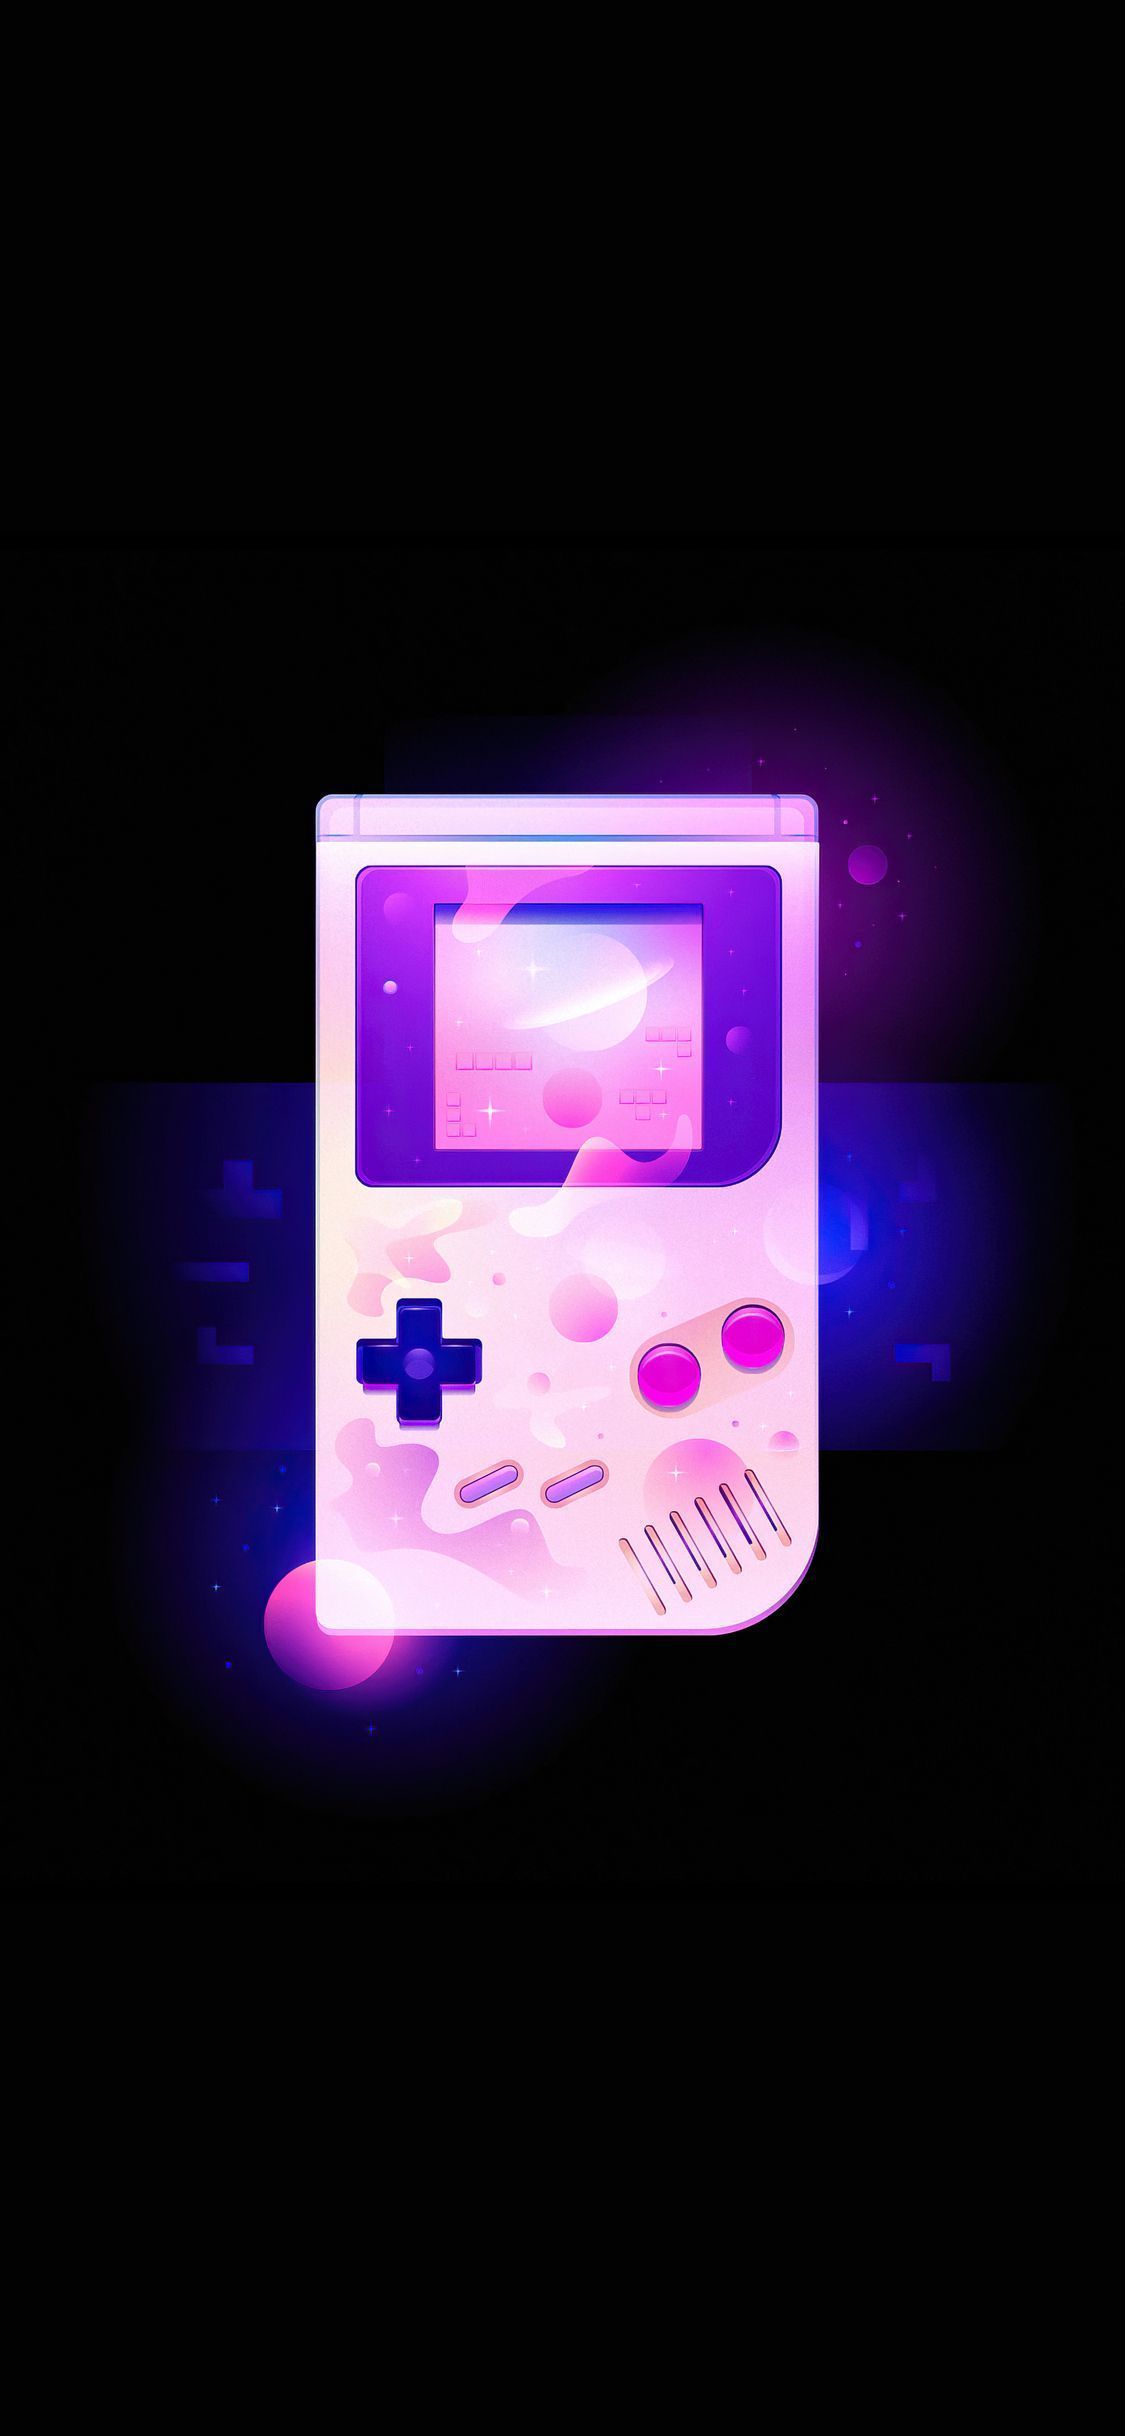 A purple and pink Gameboy on a black background - Game Boy